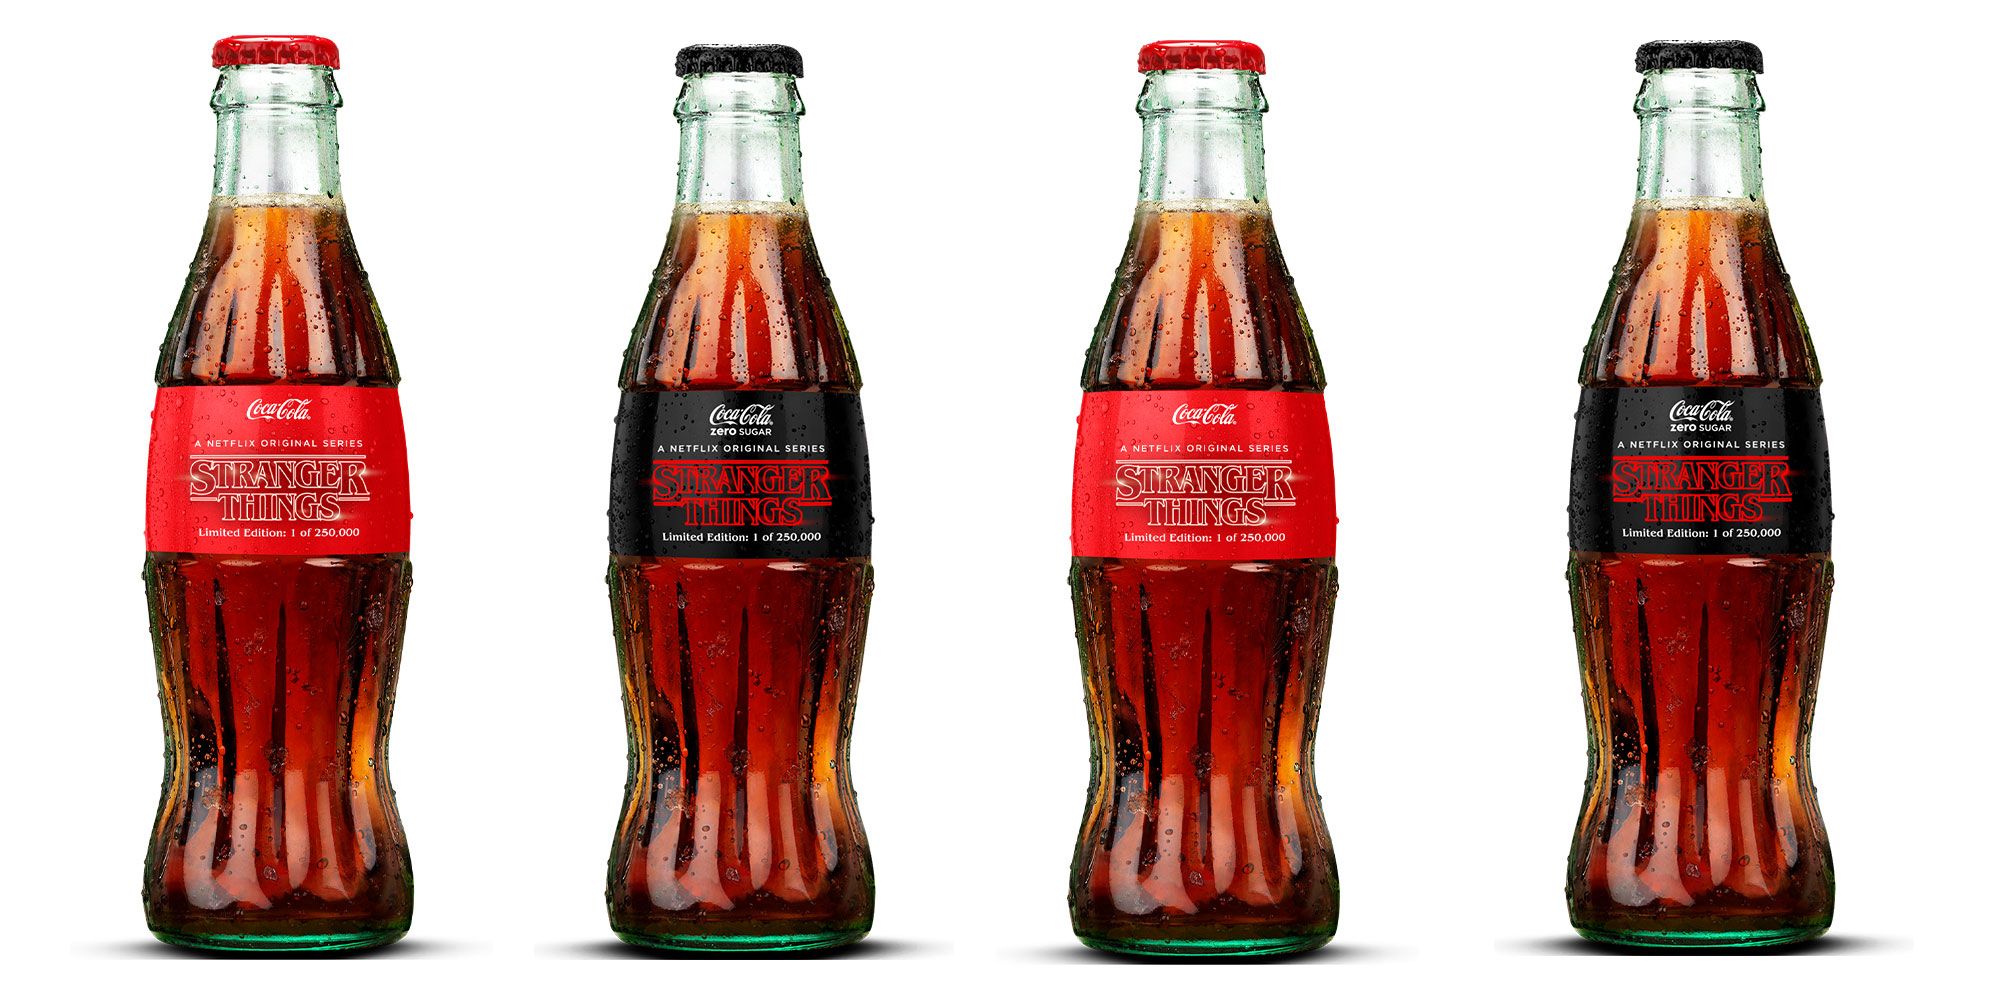 Details about   2019 SHARE A COKE STRANGER THINGS COCA COLA & COKE ZERO LIMITED EDITION BOTTLES 